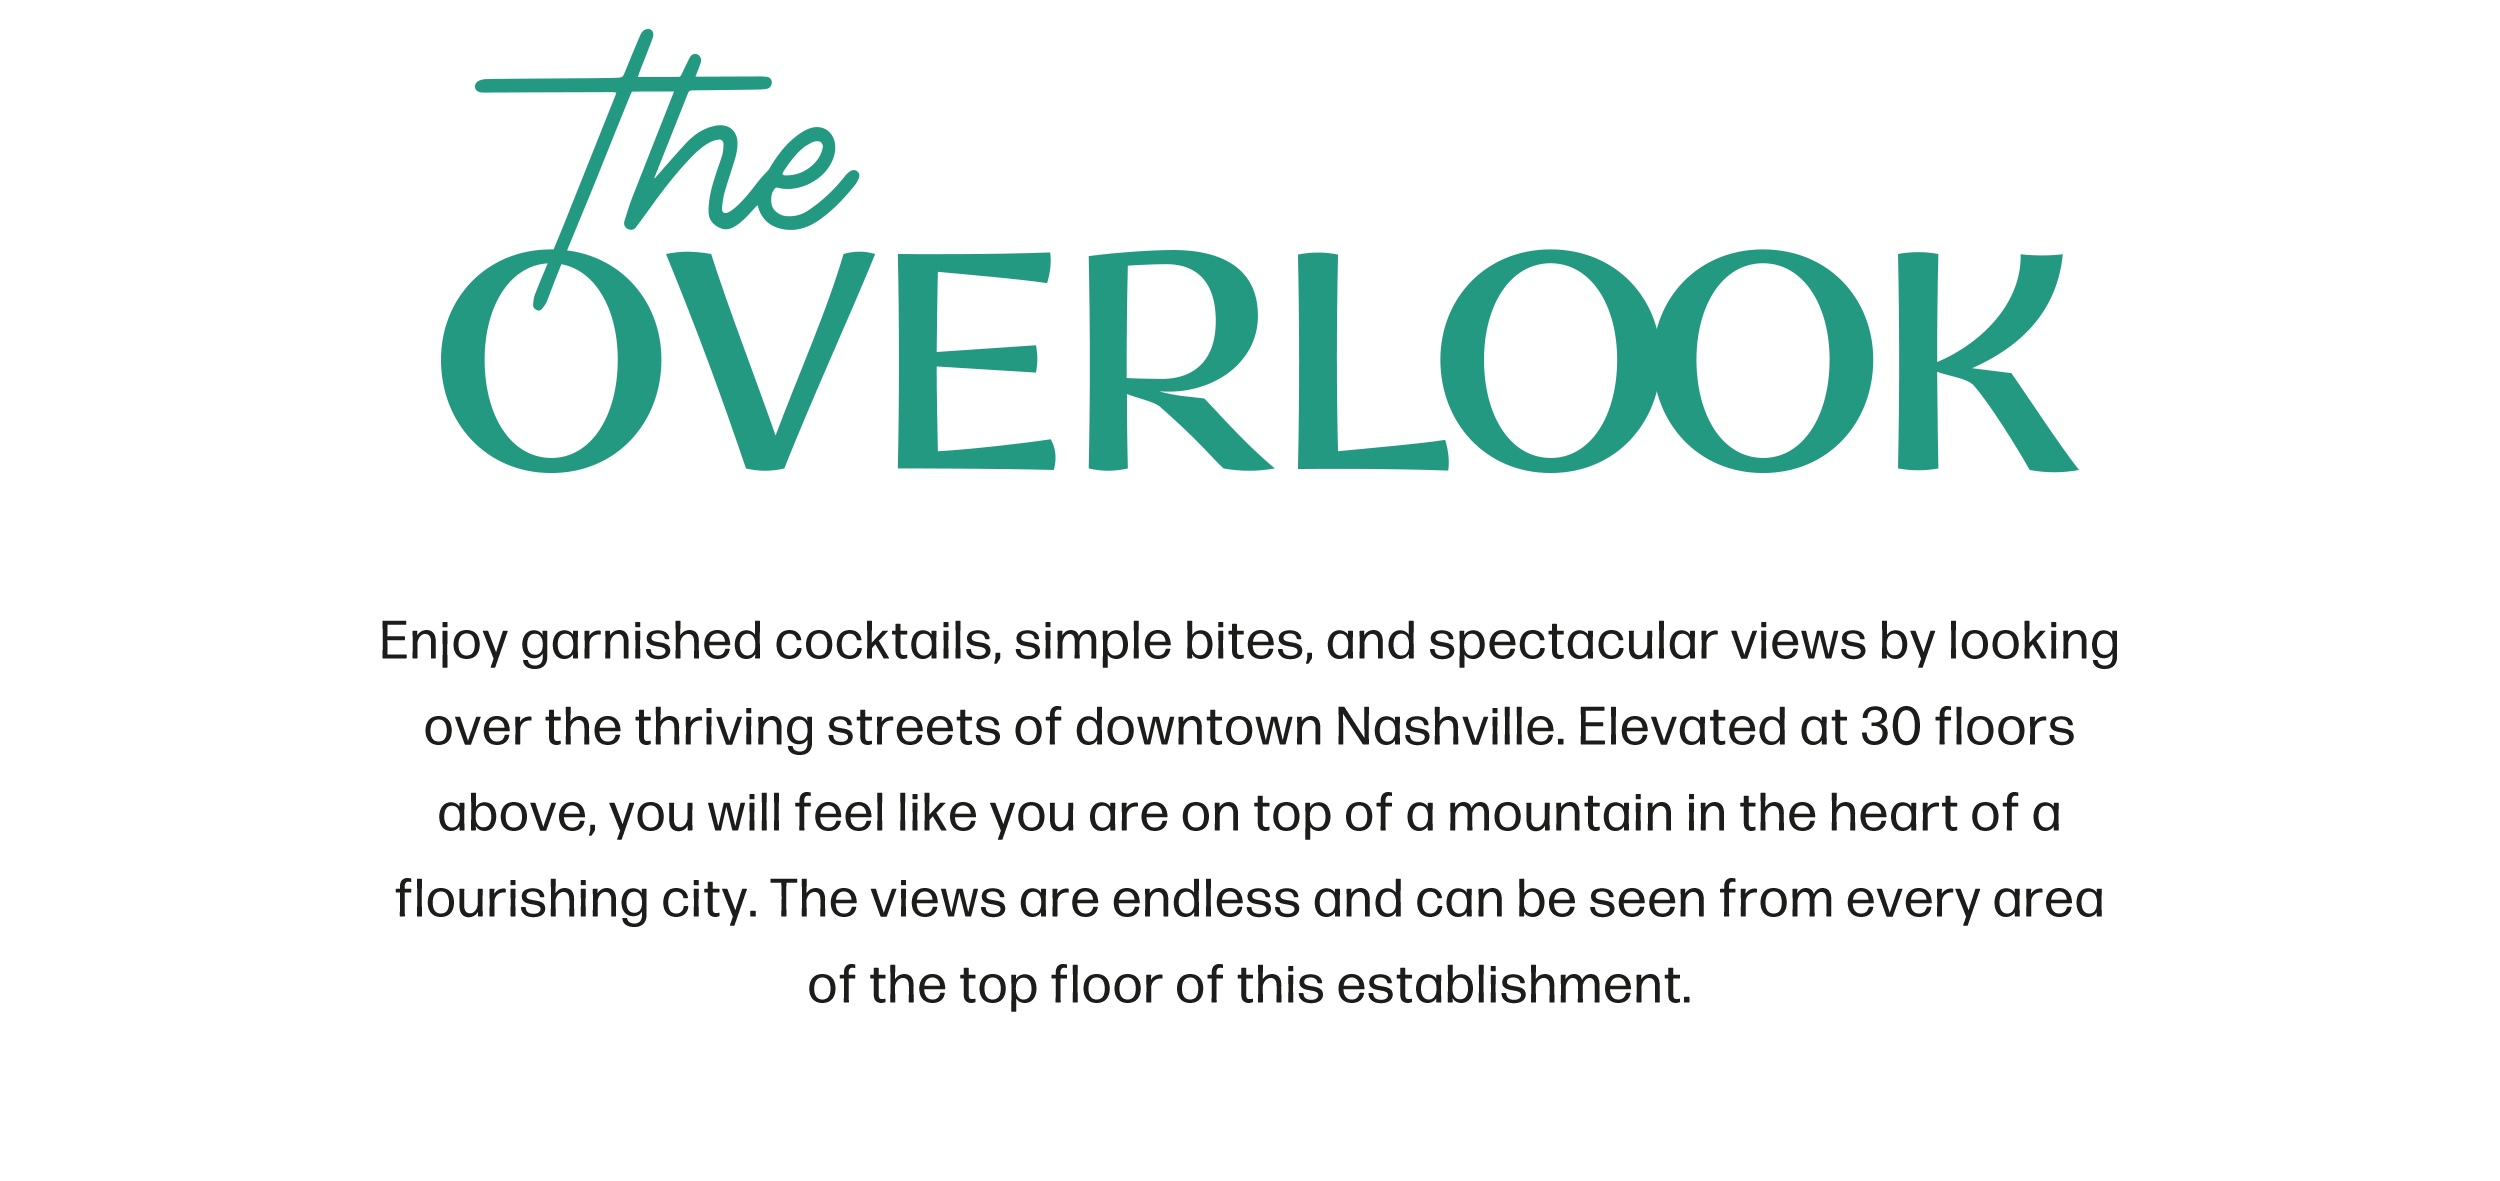 The Overlook logo in teal, with a description about the name: 